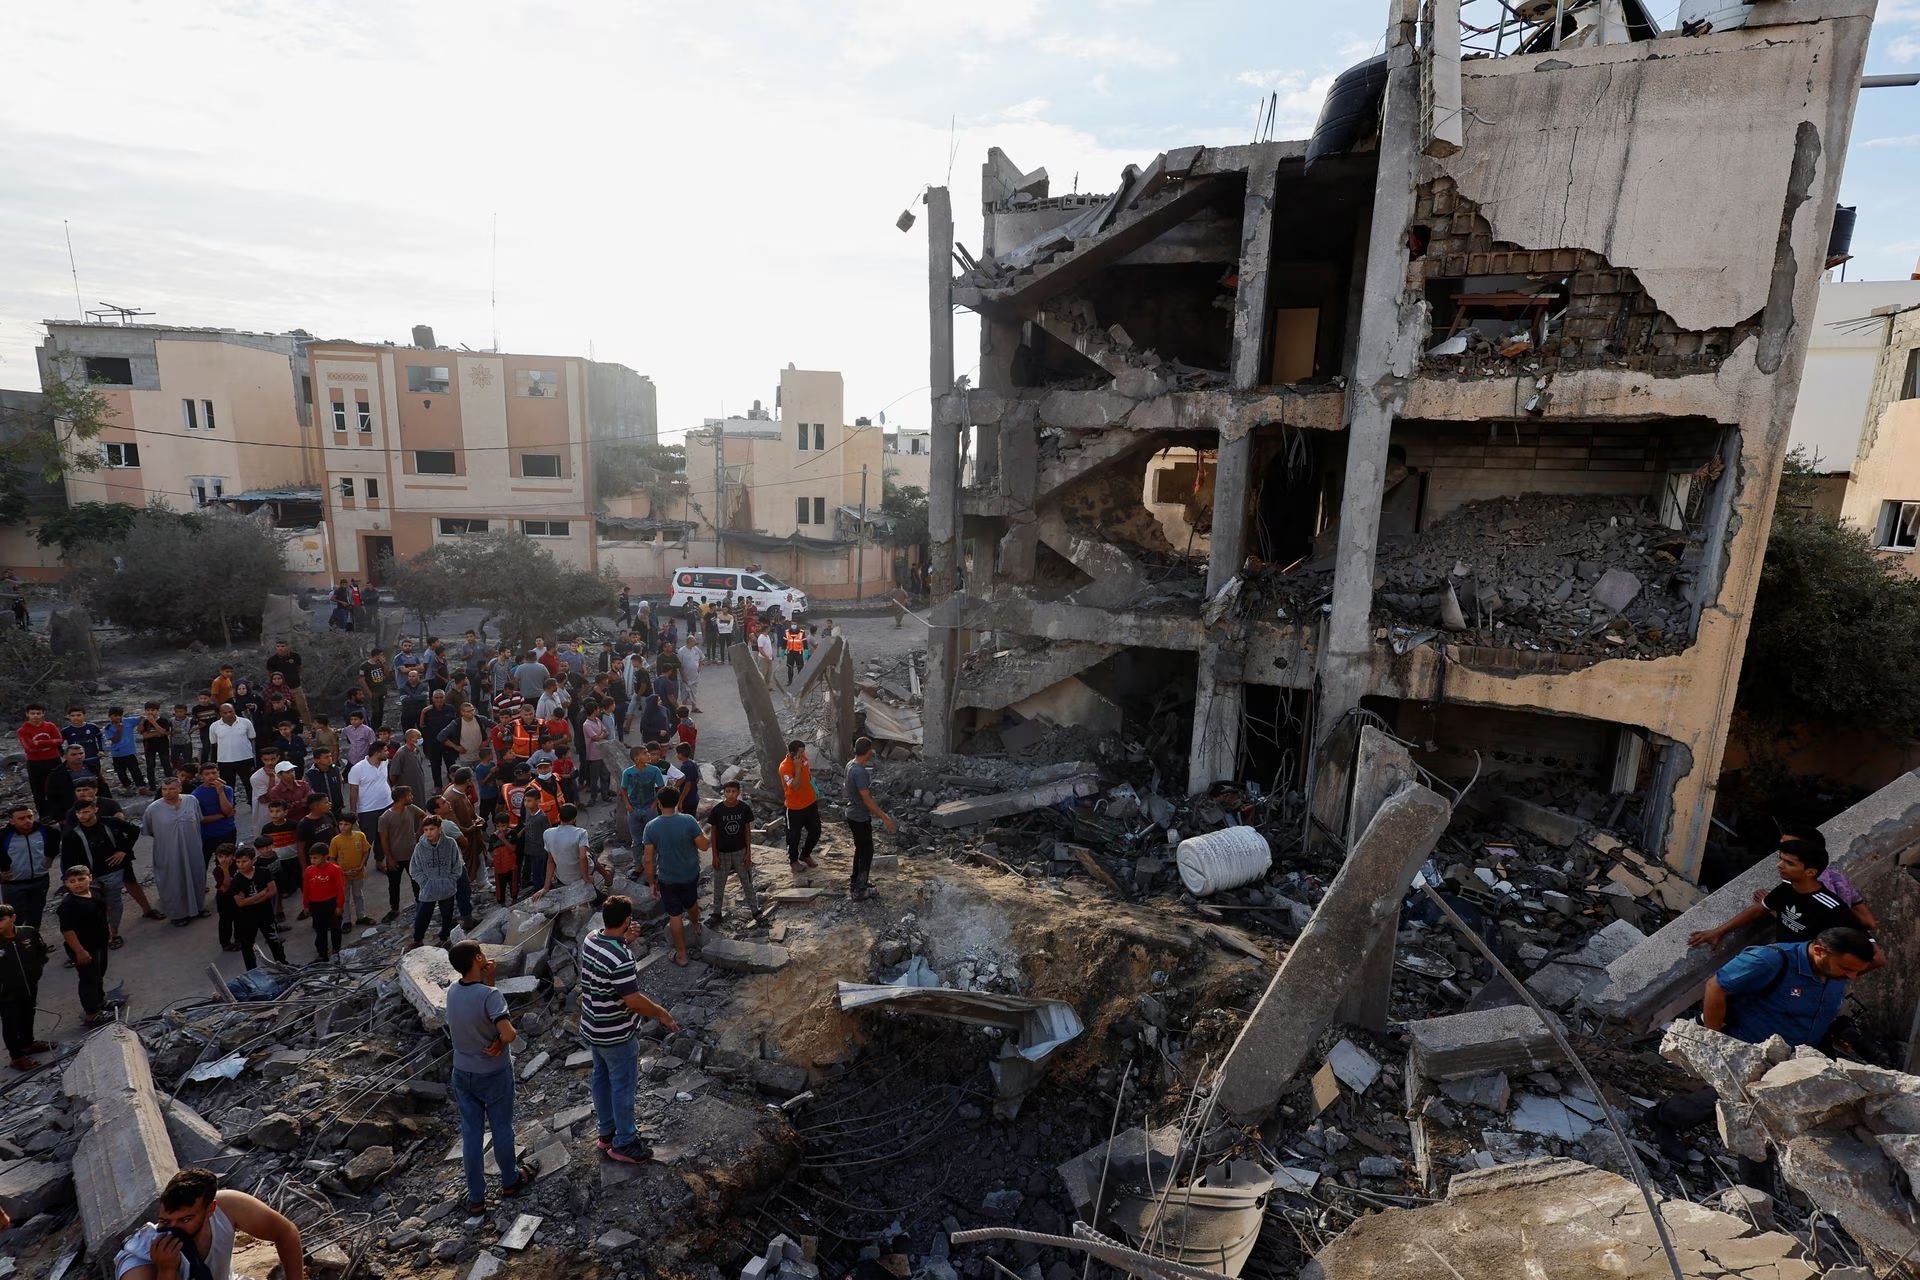 Palestinians search for casualties under the rubble of a building destroyed by Israeli strikes in Khan Younis in the southern Gaza Strip, October 17.